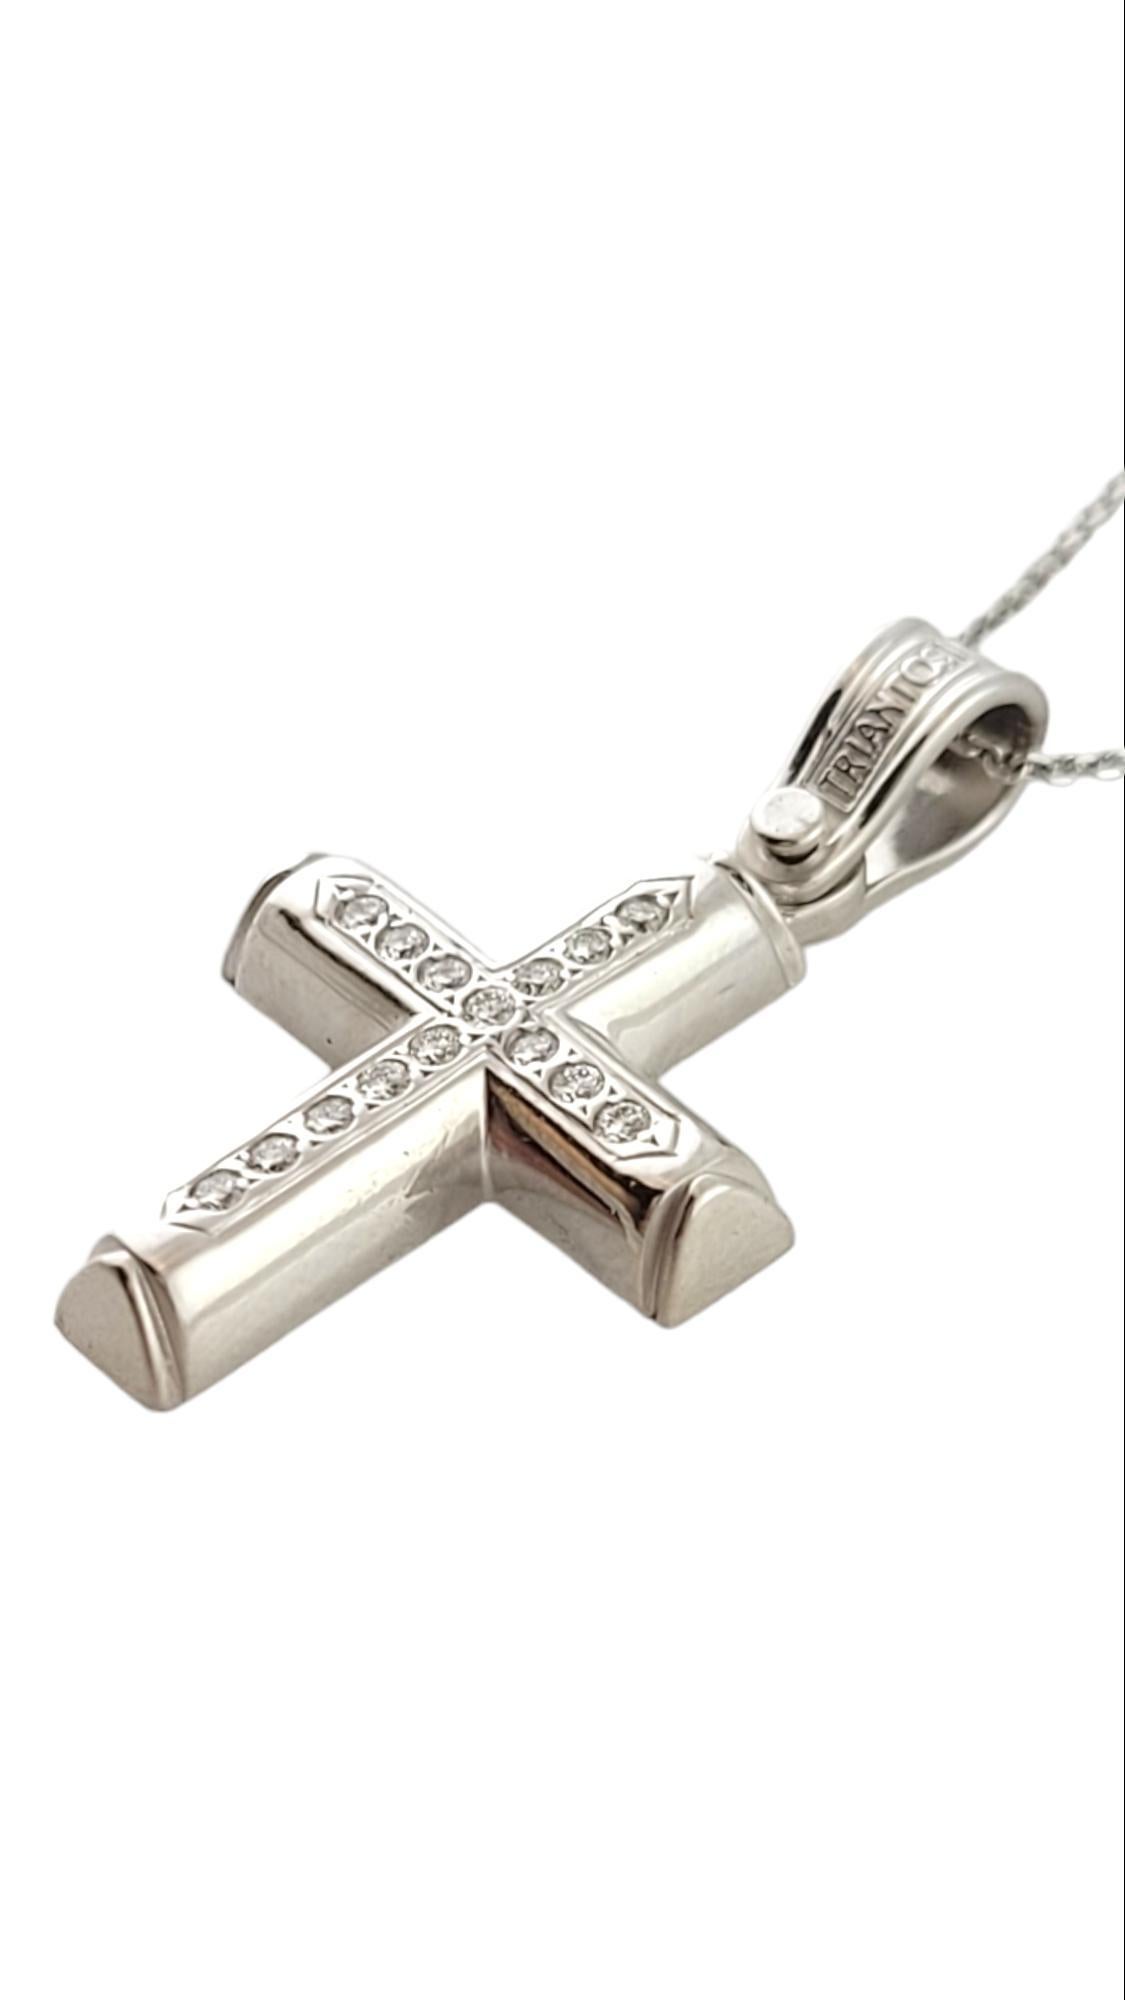 Vintage 14K White Gold Diamond Cross Pendant Necklace

This gorgeous 14K gold cross pendant features 15 sparkling round brilliant cut diamonds and is paired with a beautiful 14K gold chain!

Approximate total diamond weight: .15 cts

Diamond color: